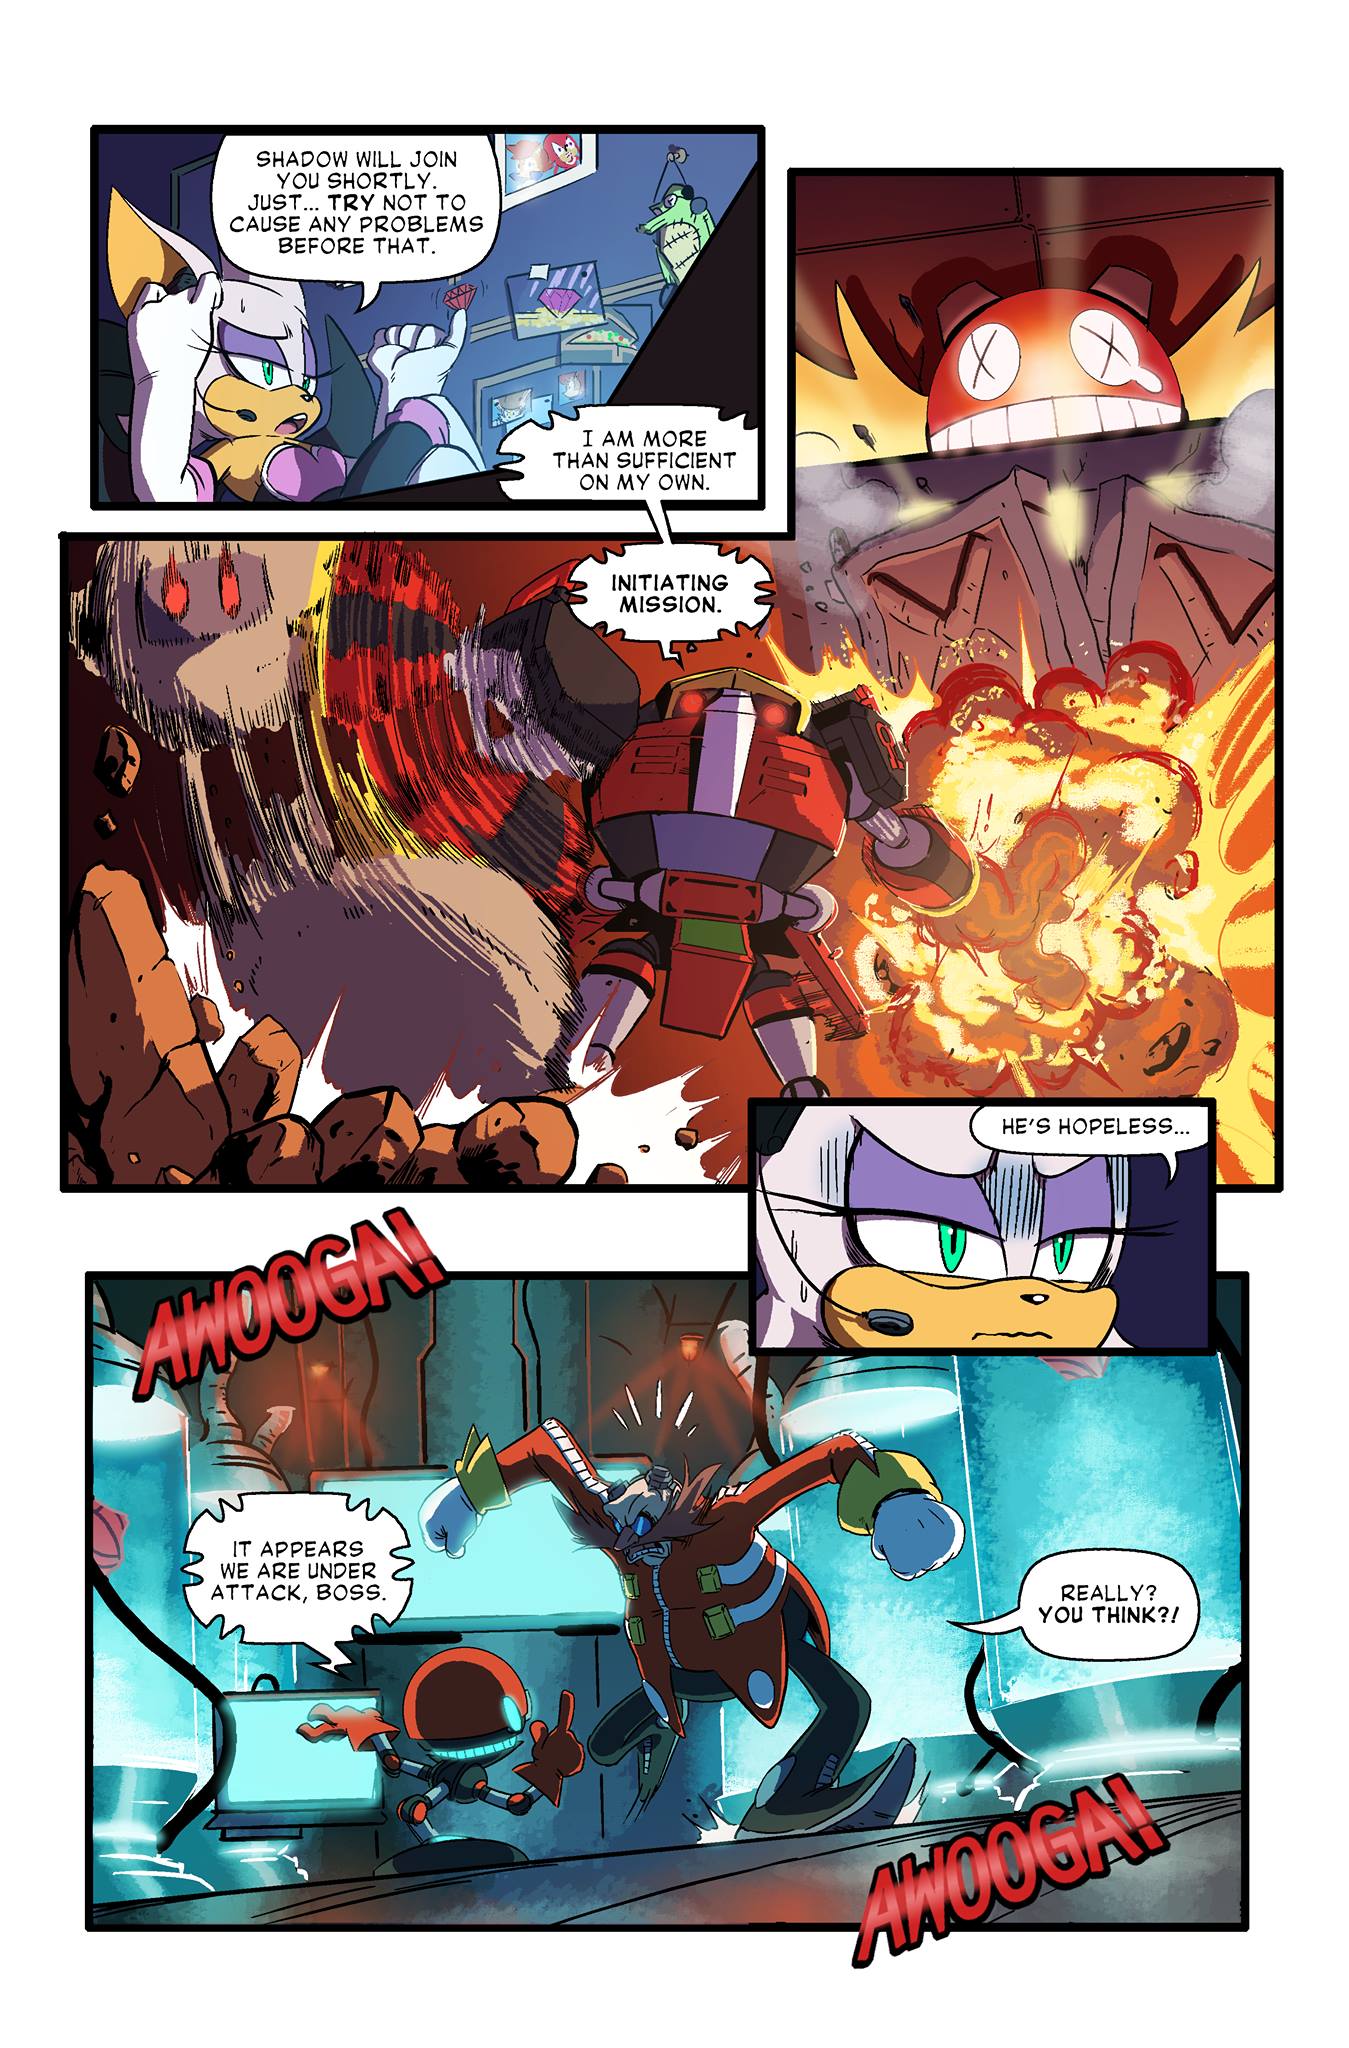 Sonic Forces: Looming Shadow web comic brings back Team Dark, features